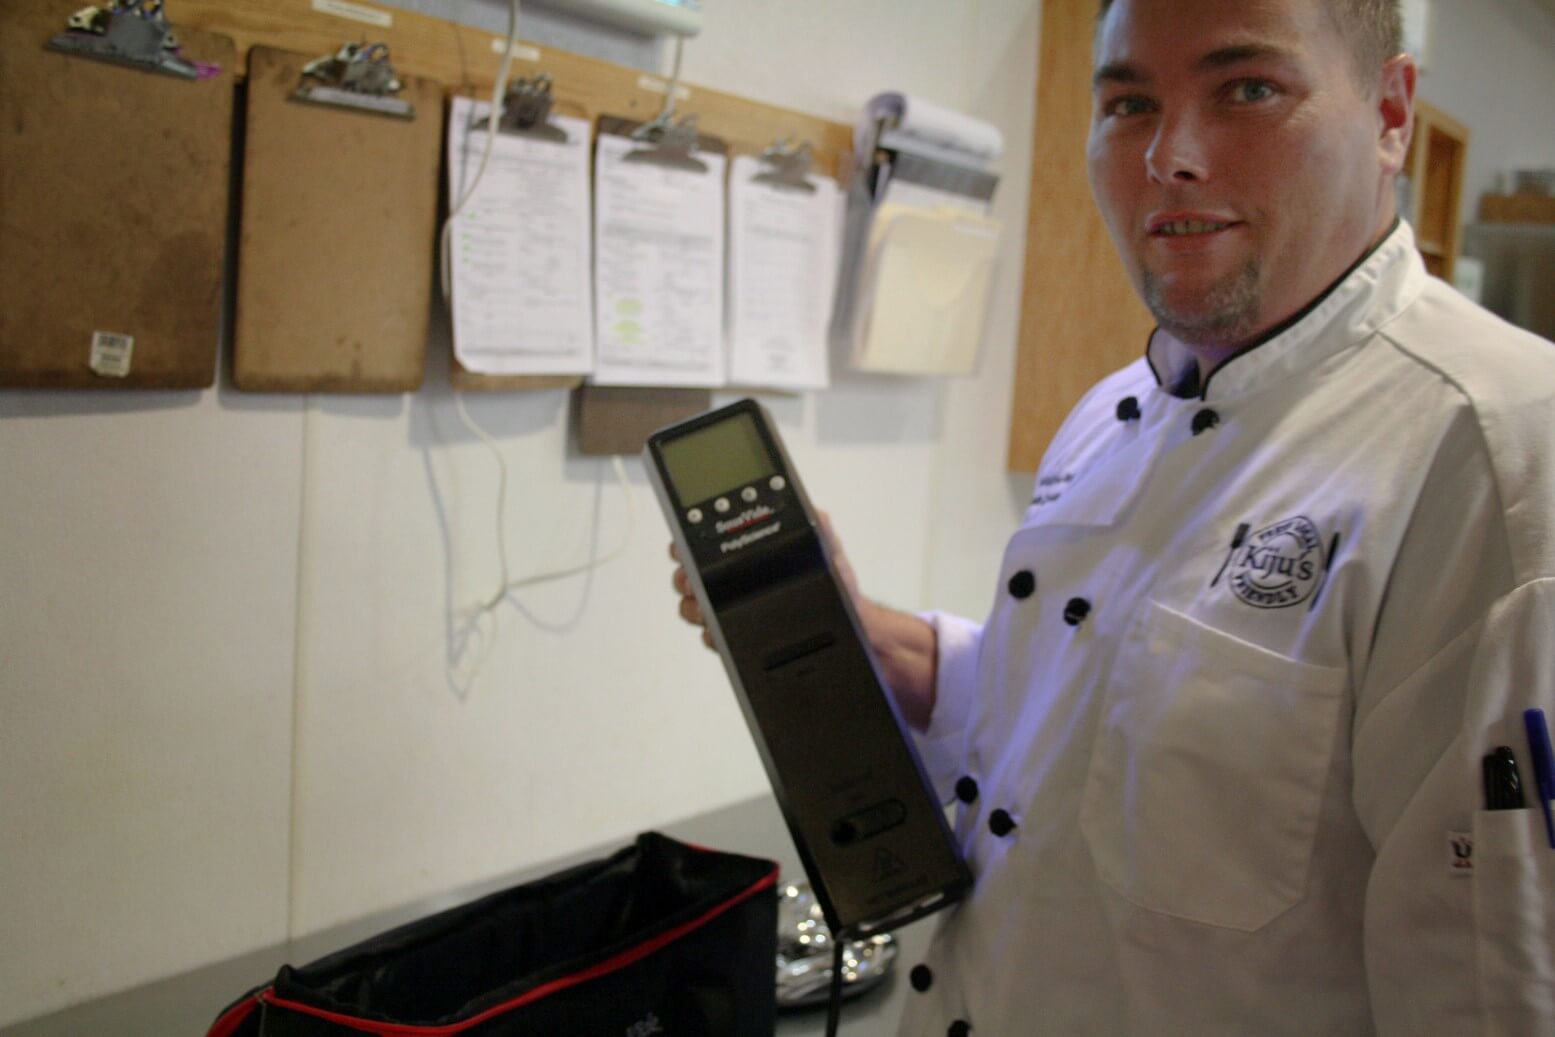 Chef Zwarun shows me his new Sous Vide machine, which he's learning how to use. 